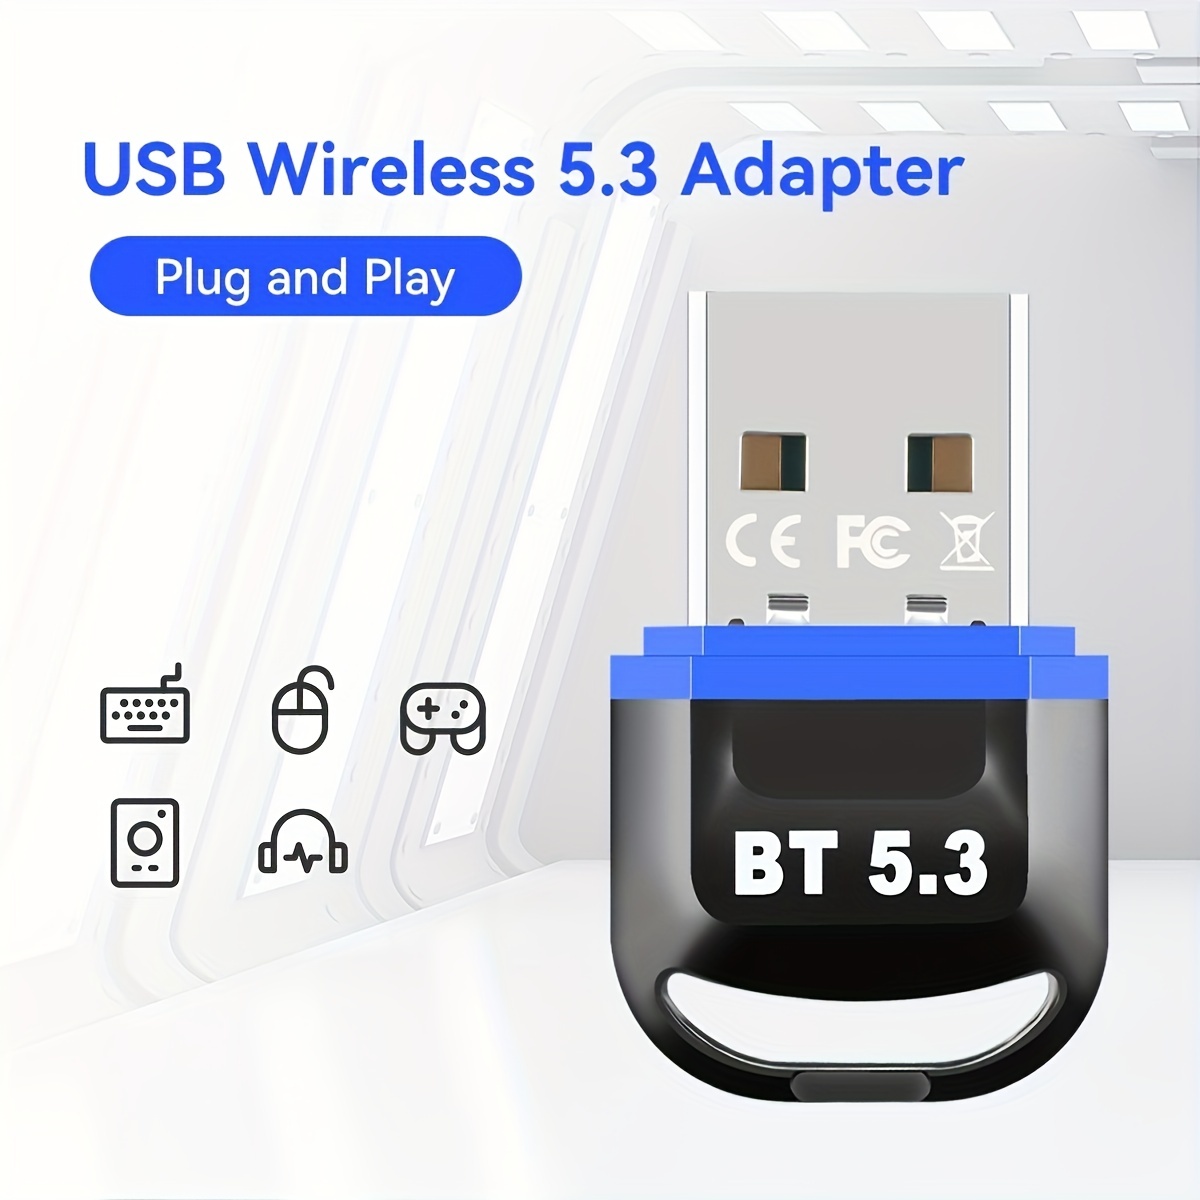 TP-Link USB Bluetooth Adapter for PC, Bluetooth 4.0 Dongle Receiver, Plug &  Play, Nano Size, EDR & A2DP Technology, Supports Windows 11/10/8.1/8/7/XP